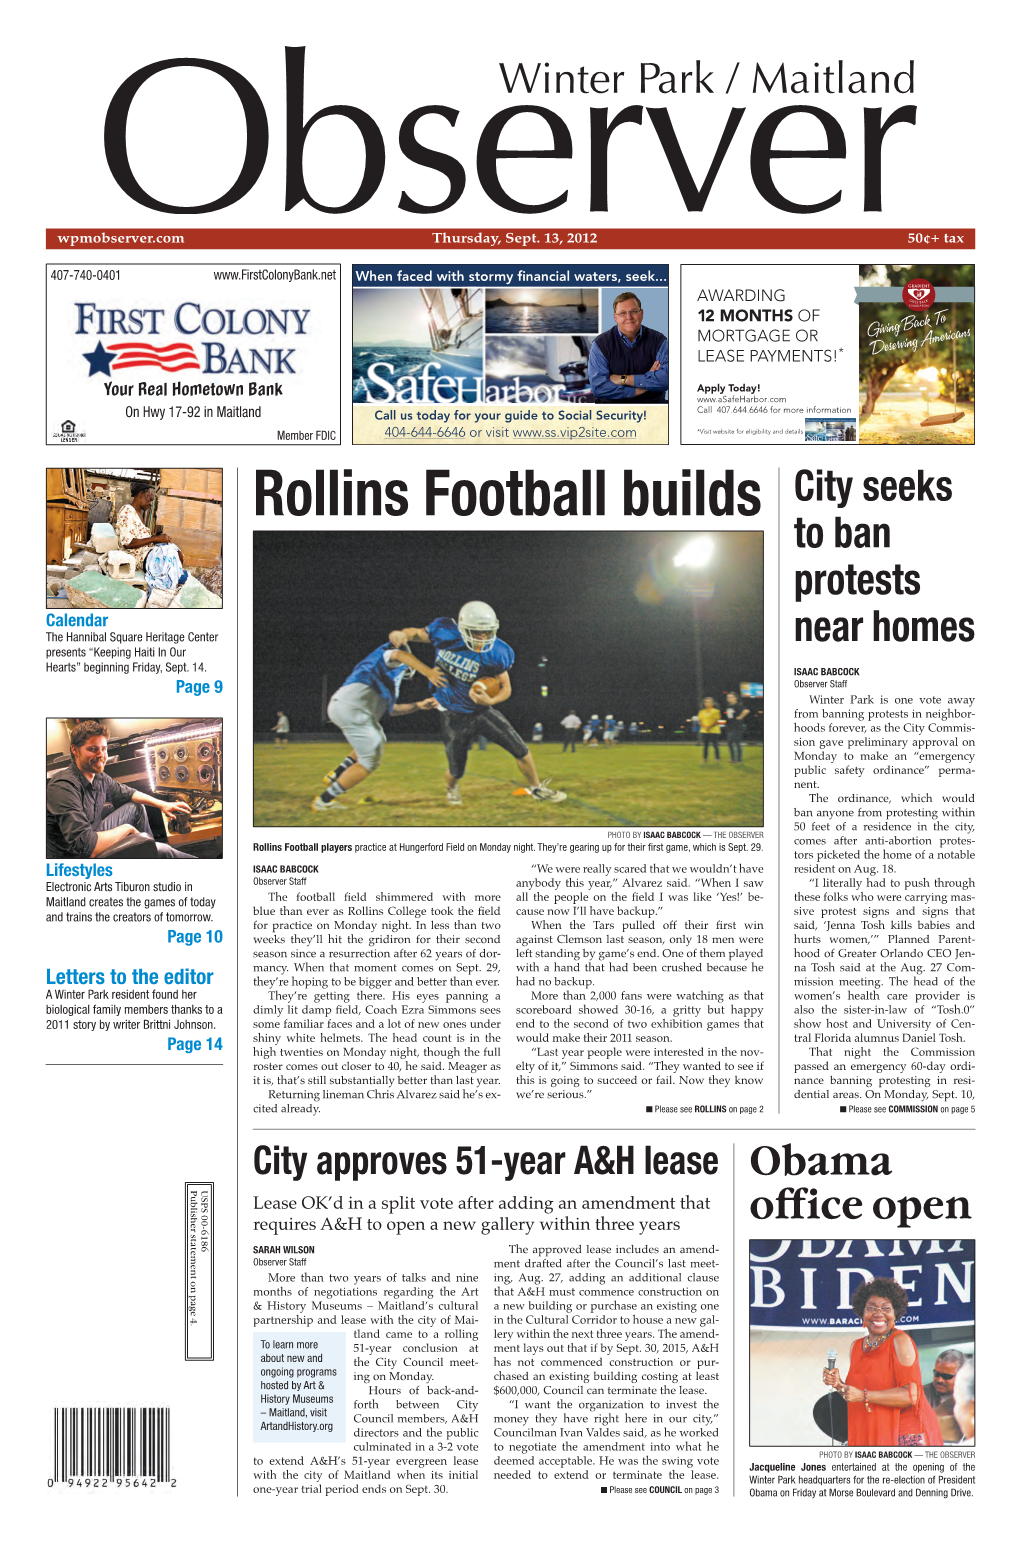 Rollins Football Builds Rollins Football USPS 00-6186 Publisher Statement on Page 4